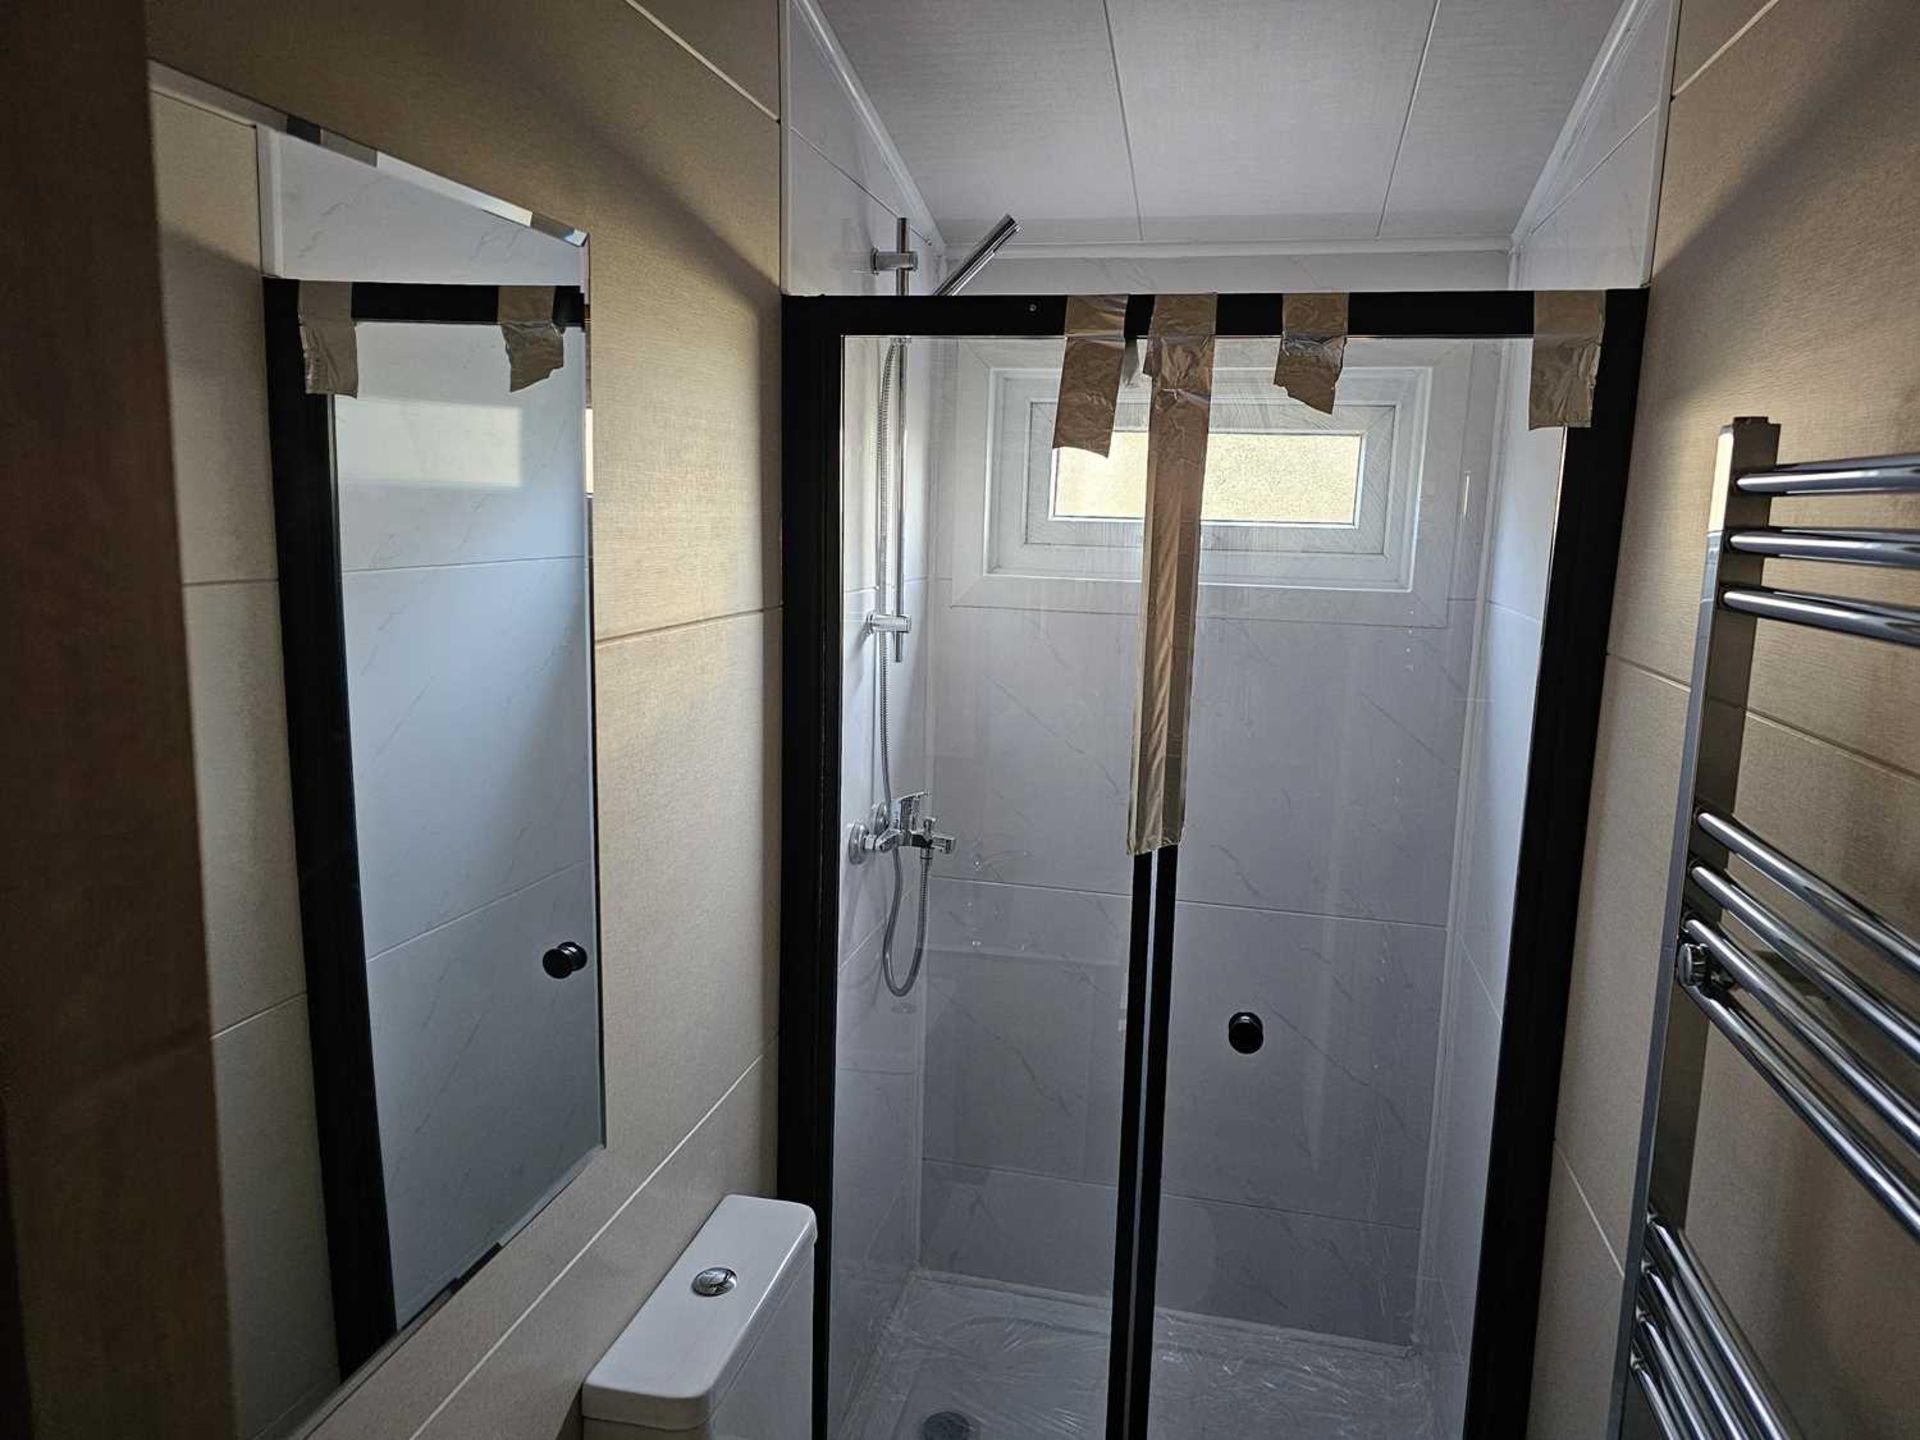 Unused The Steel Holiday Homes Ltd 36' x 12' (Steel Structure) 2 Bedroom Timber Clad Lodge, Shower R - Image 17 of 23